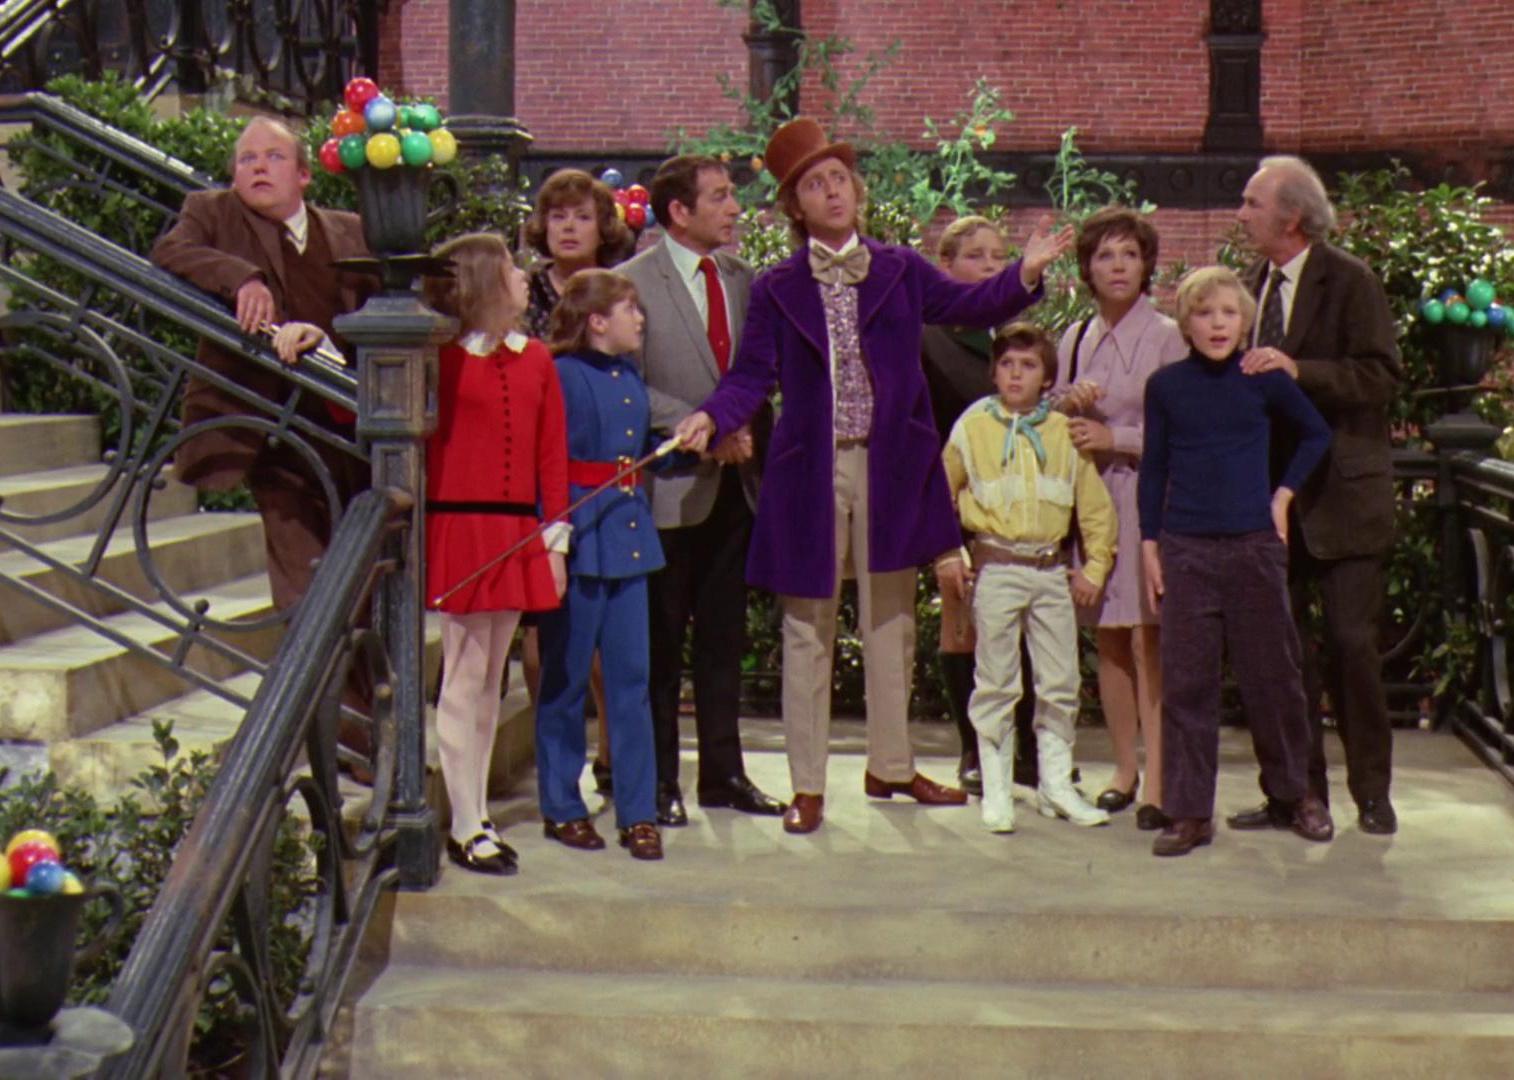 Gene Wilder, as Willy Wonka in a purple coat, showing a group of kids and parents around his factory.